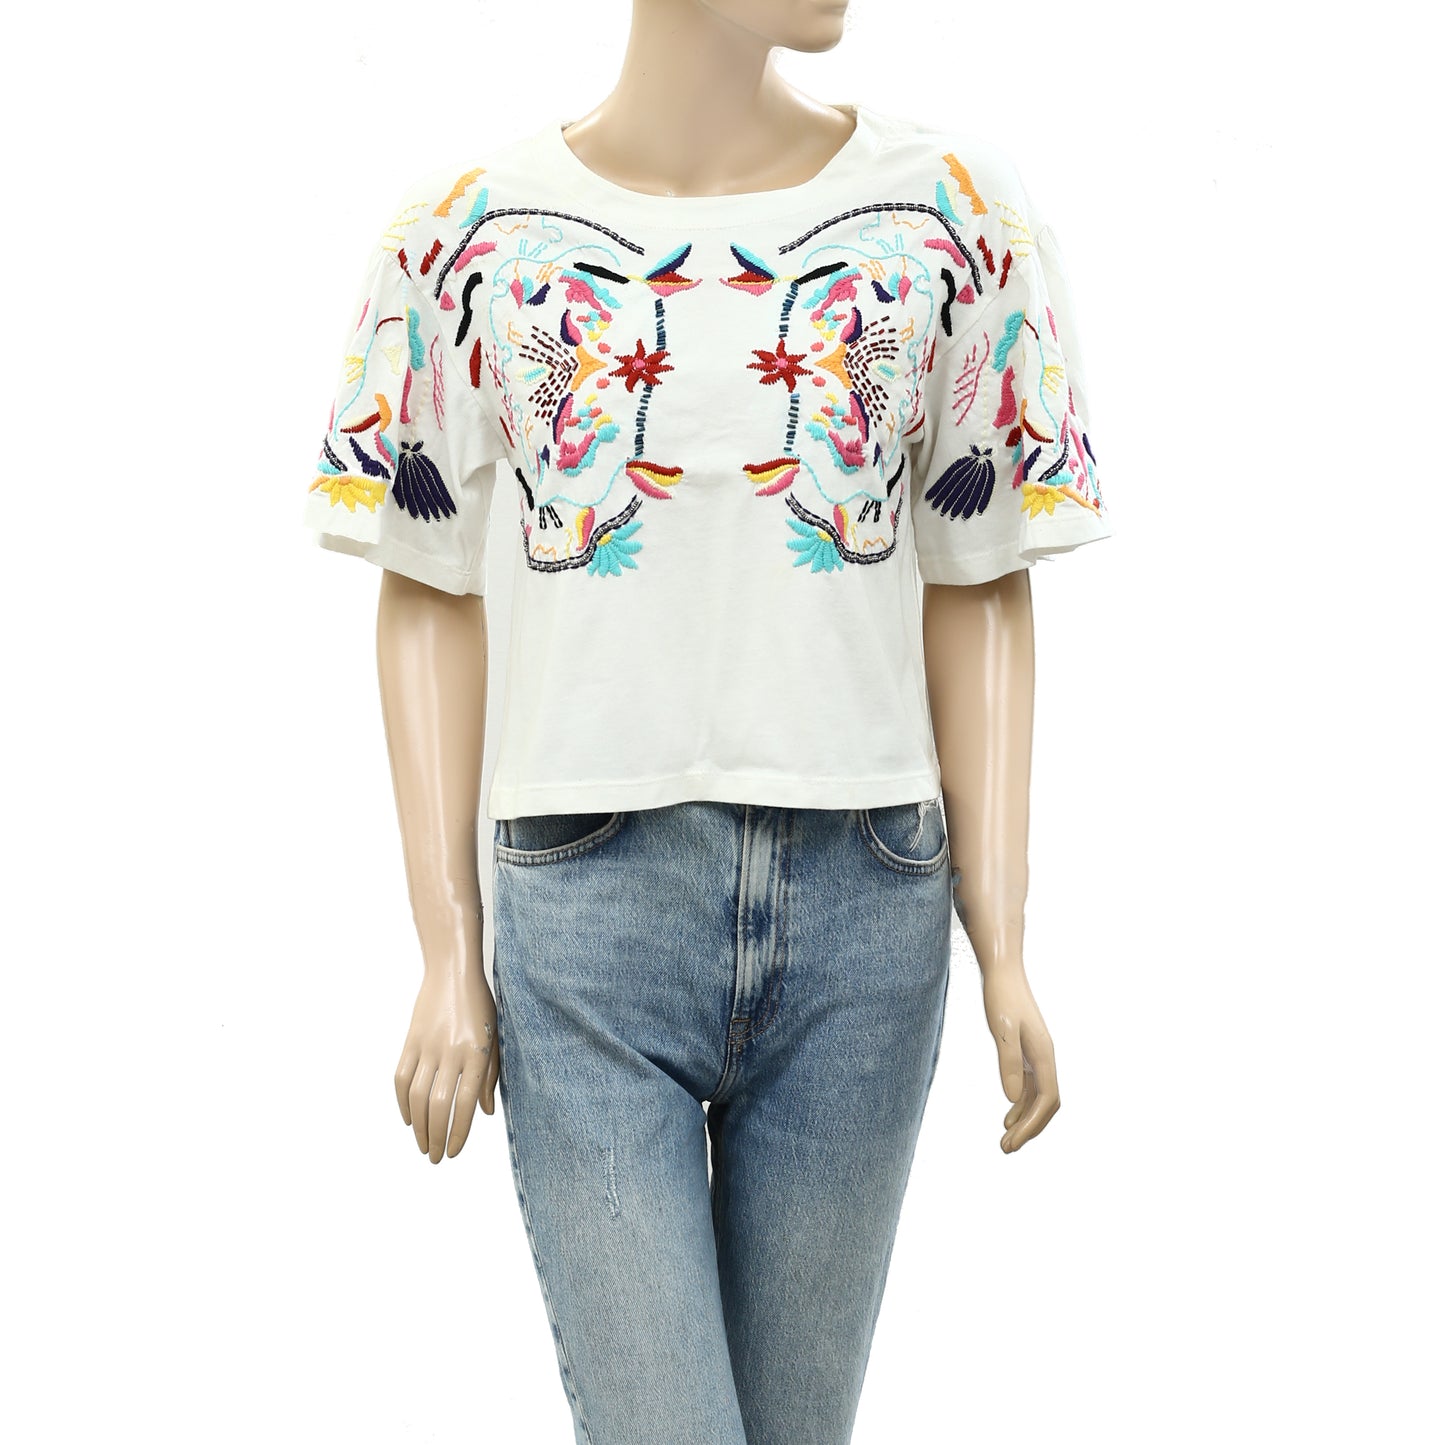 Anthropologie Floral Embroidered Shirt Blouse Top